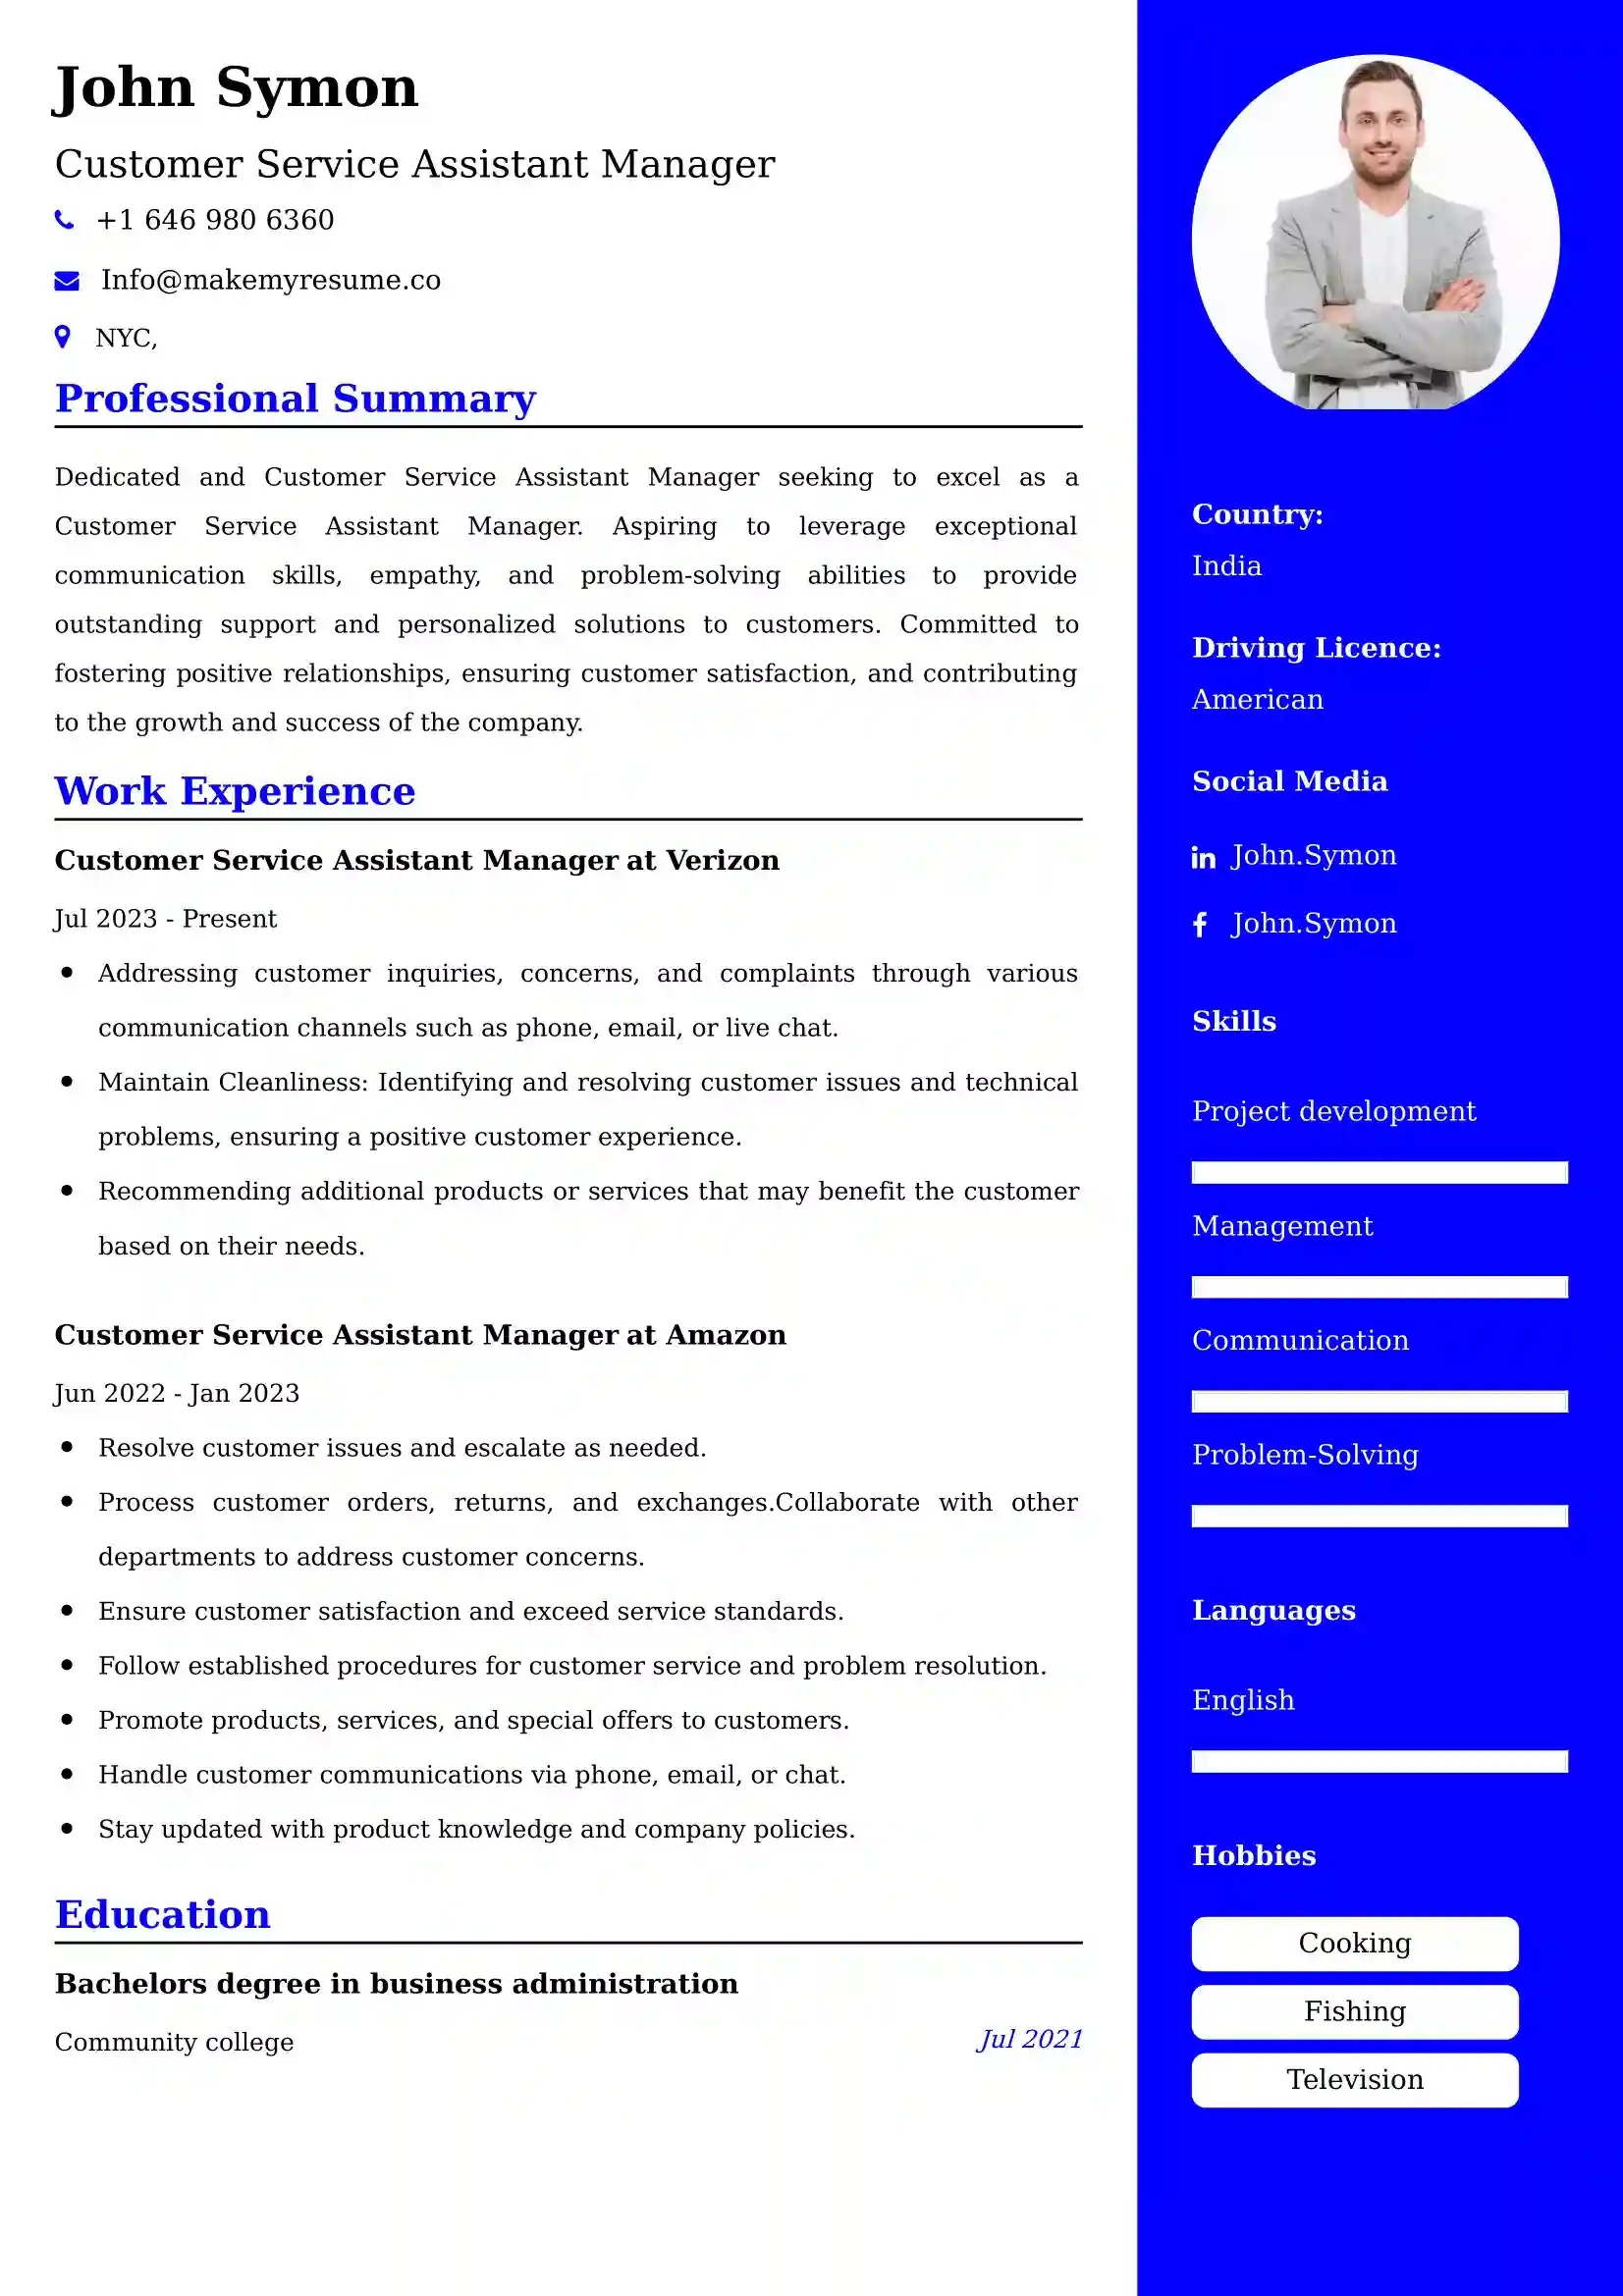 Customer Service Assistant Manager Resume Examples for UAE